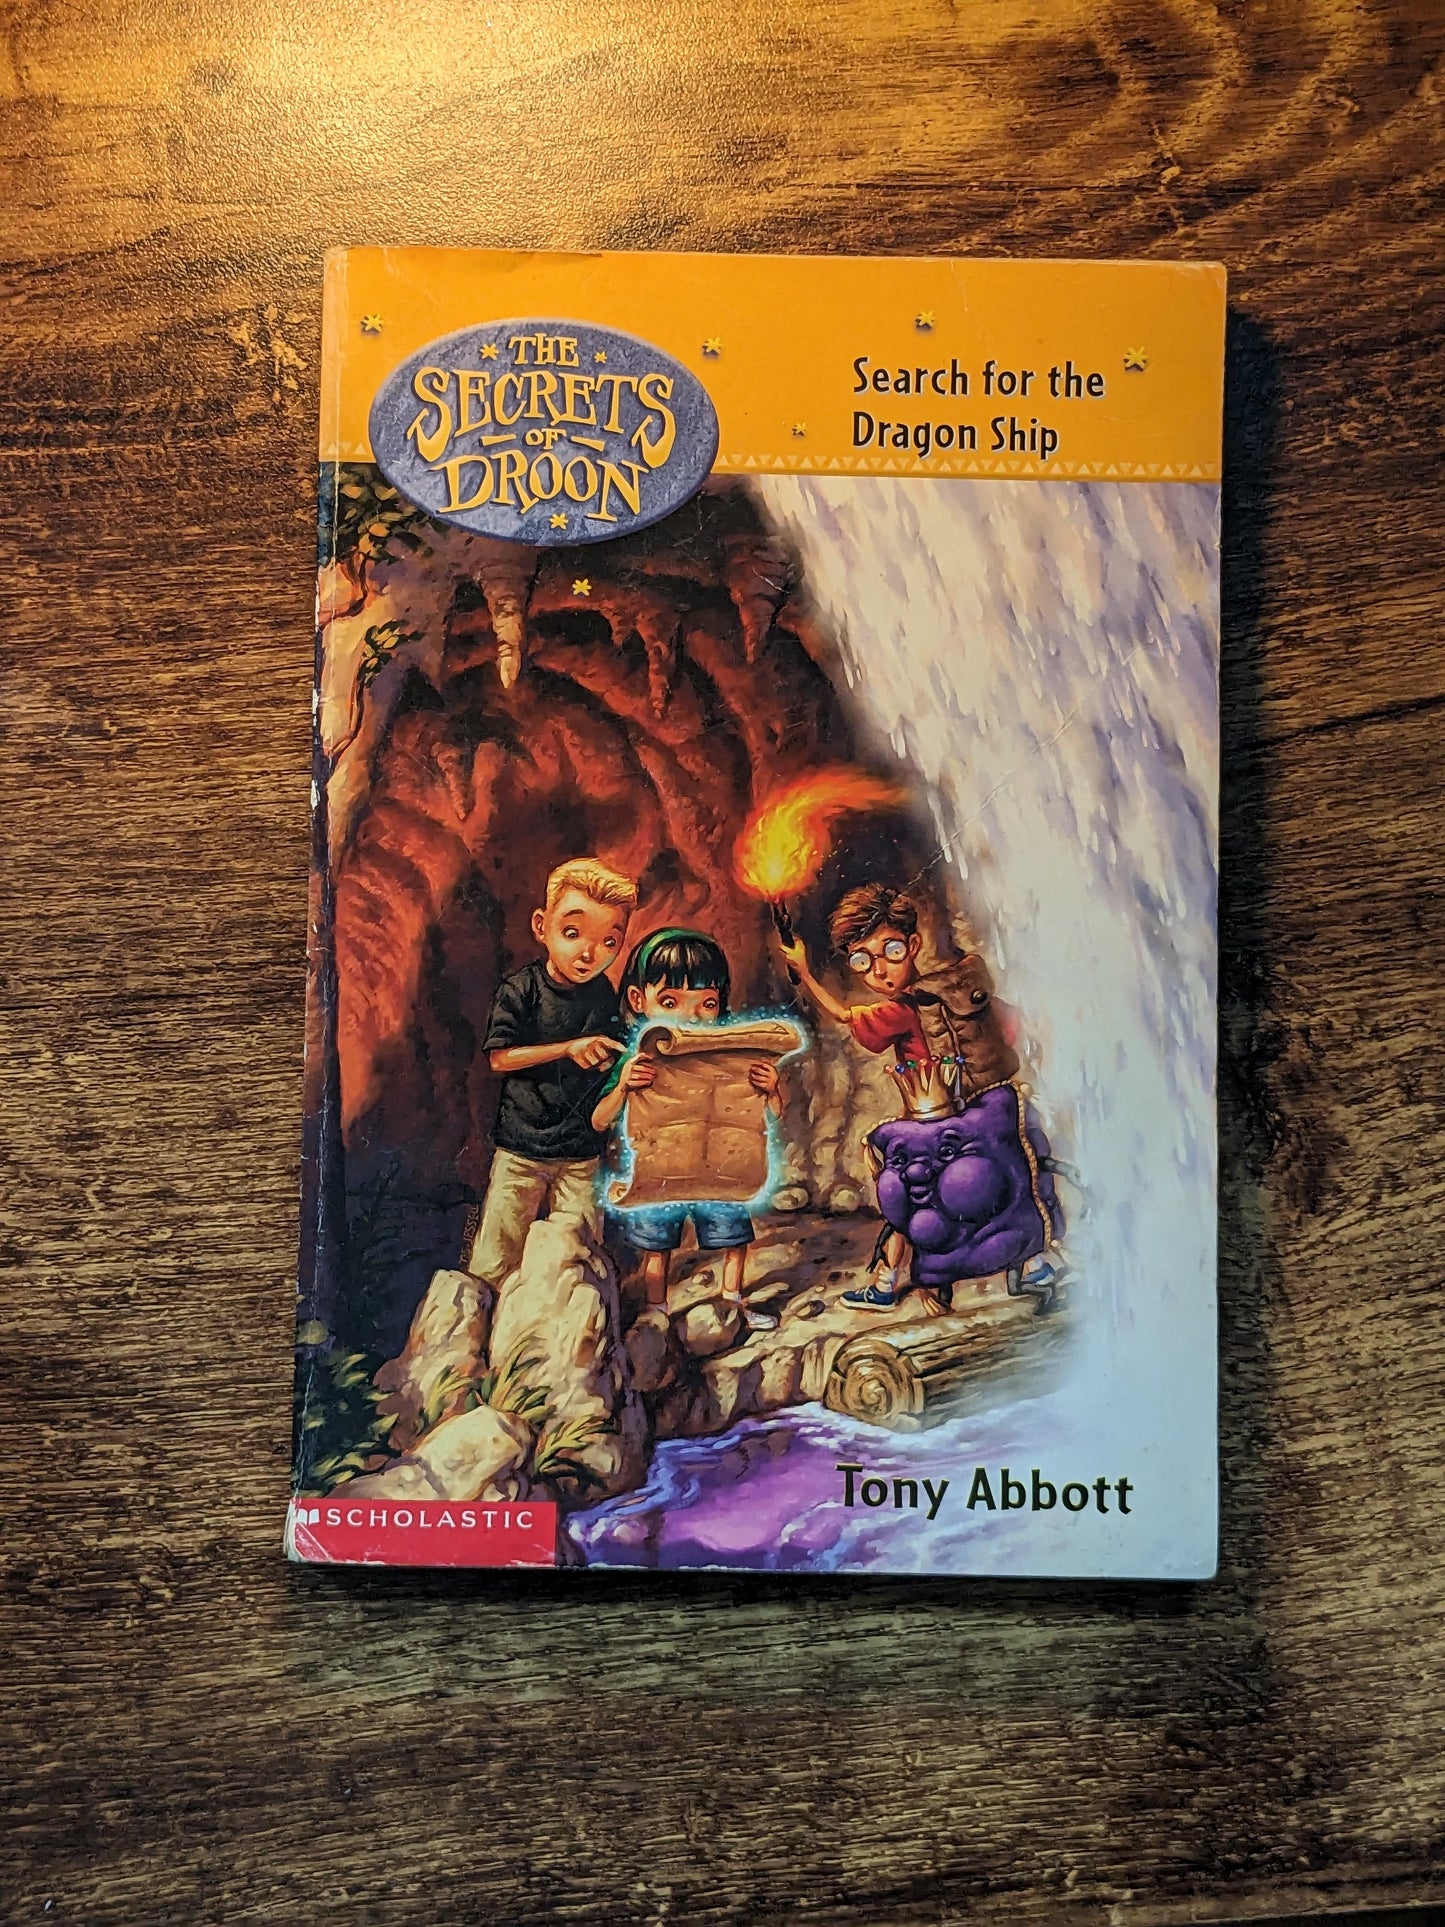 Search for the Dragon Ship (Secrets Of Droon #18) by Tony Abbott